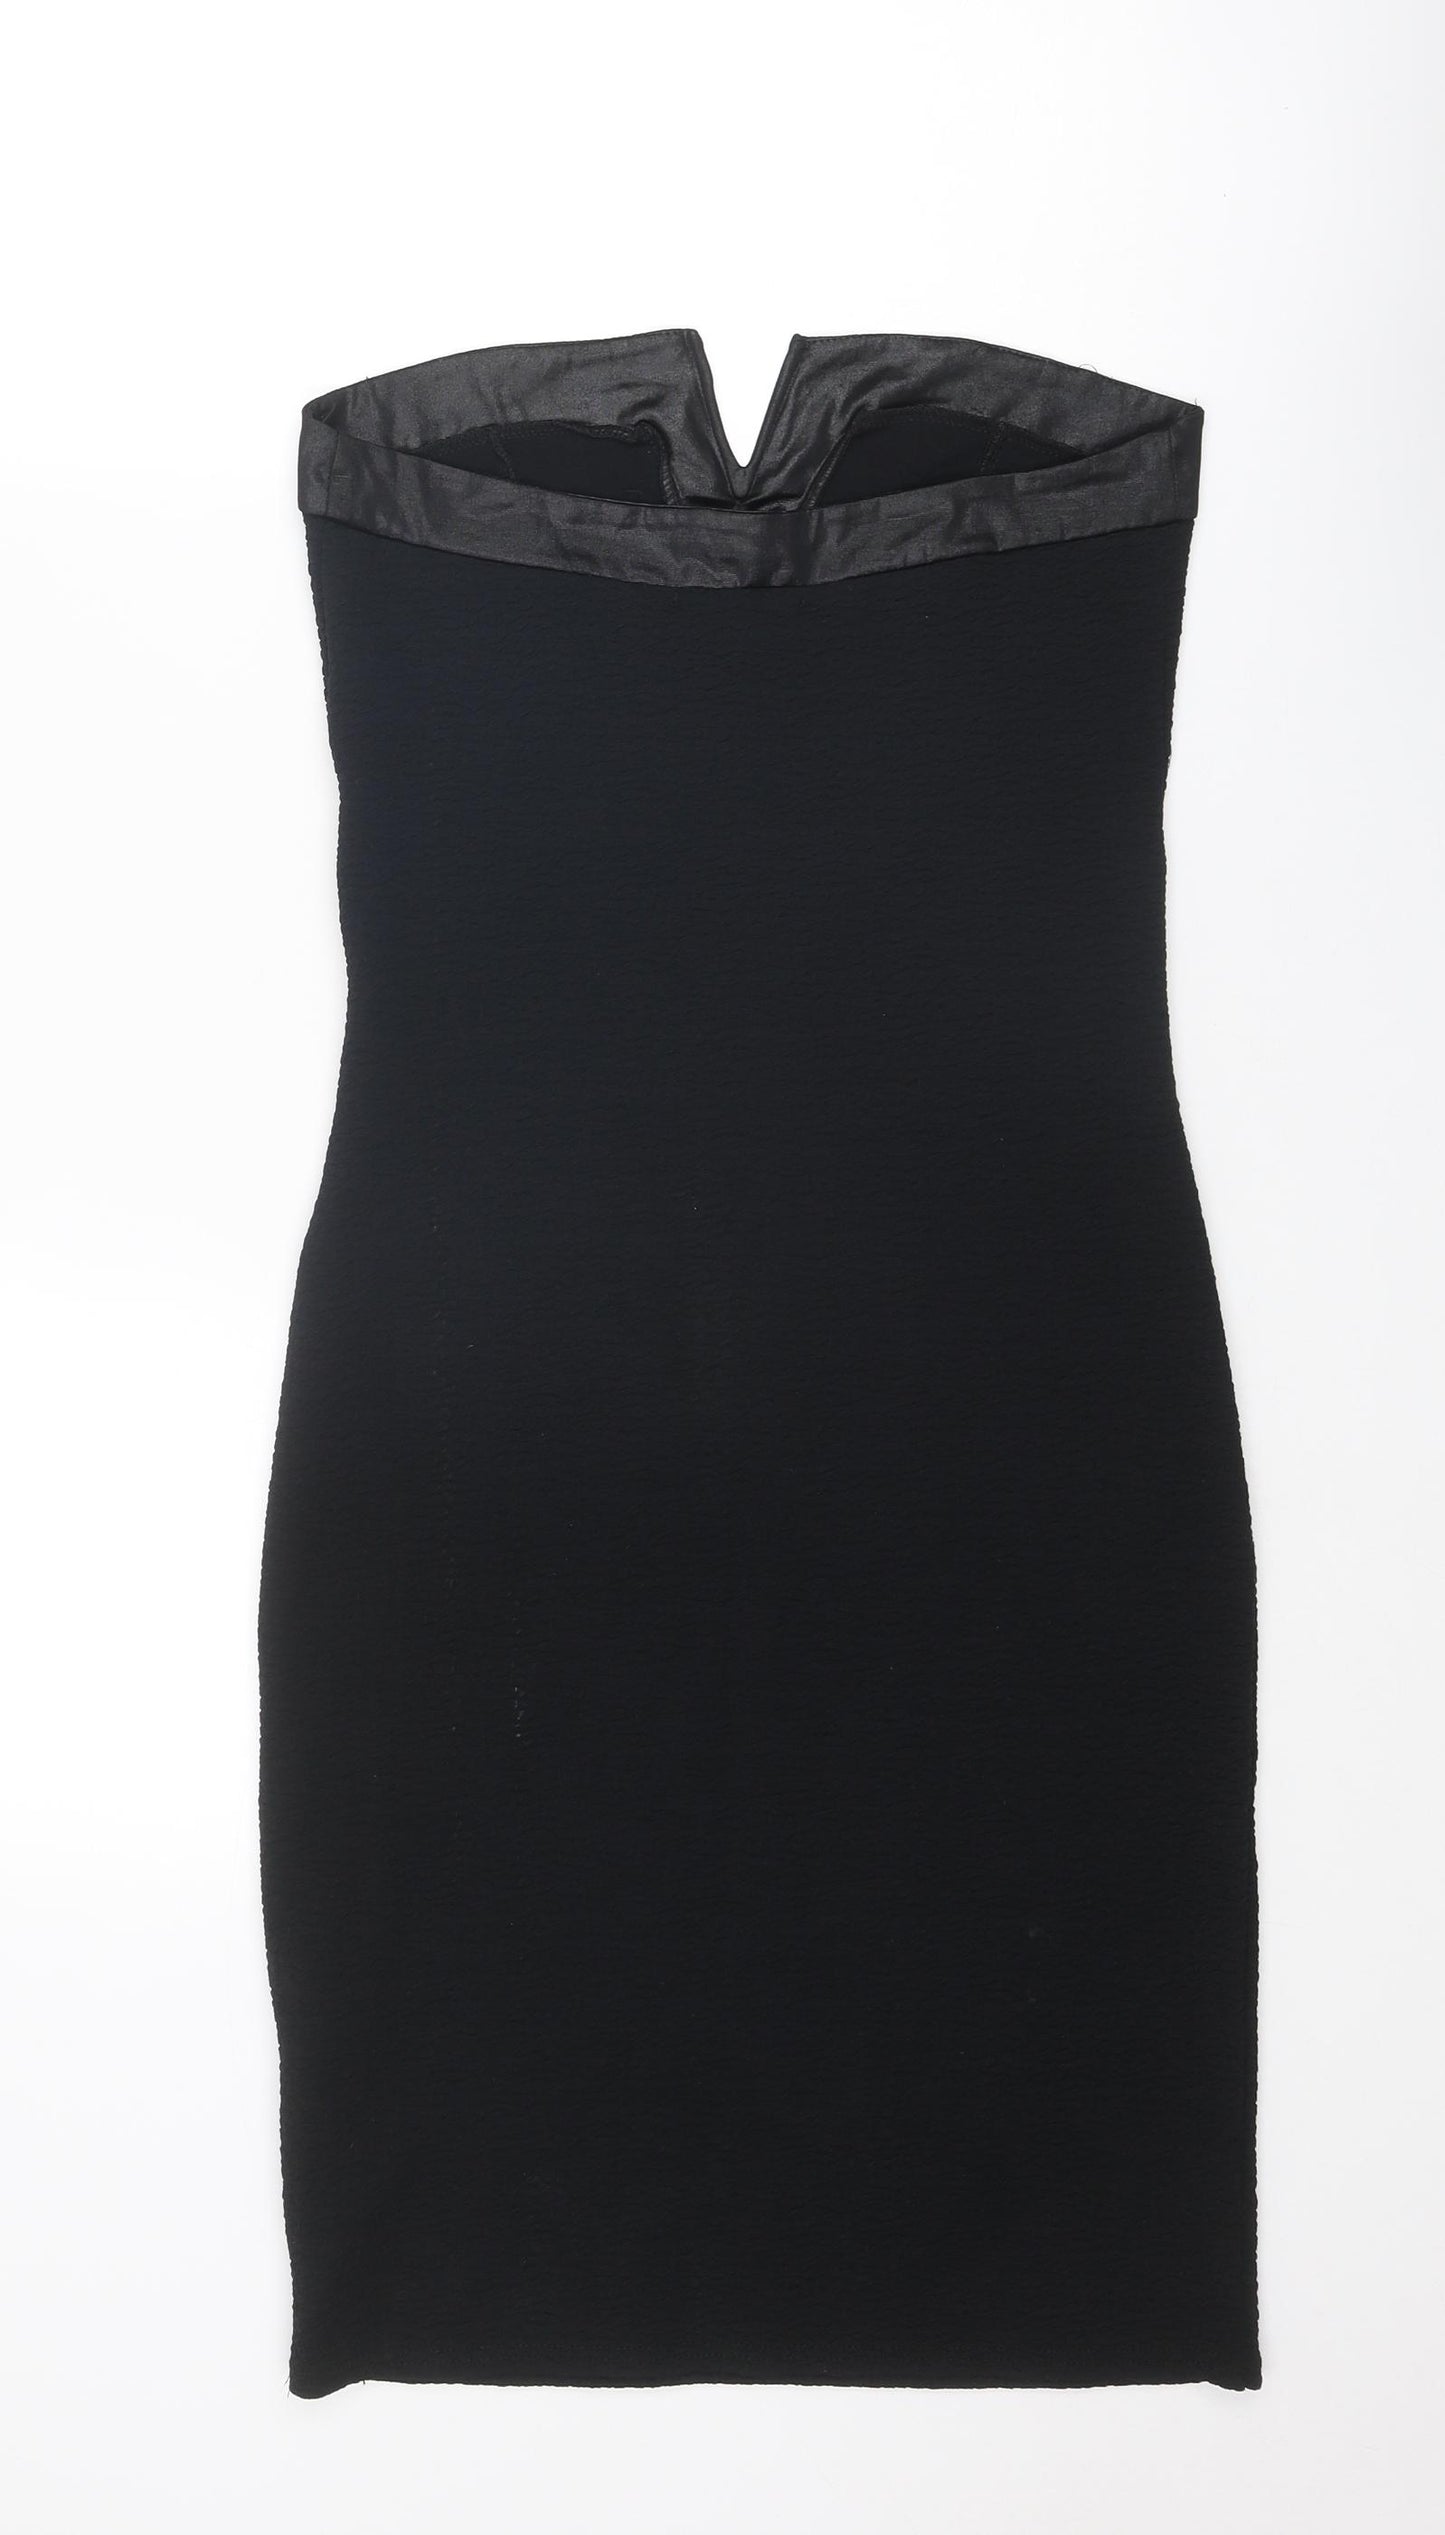 Cameo Rose Womens Black Polyester Pencil Dress Size 12 Square Neck Pullover - Strapless